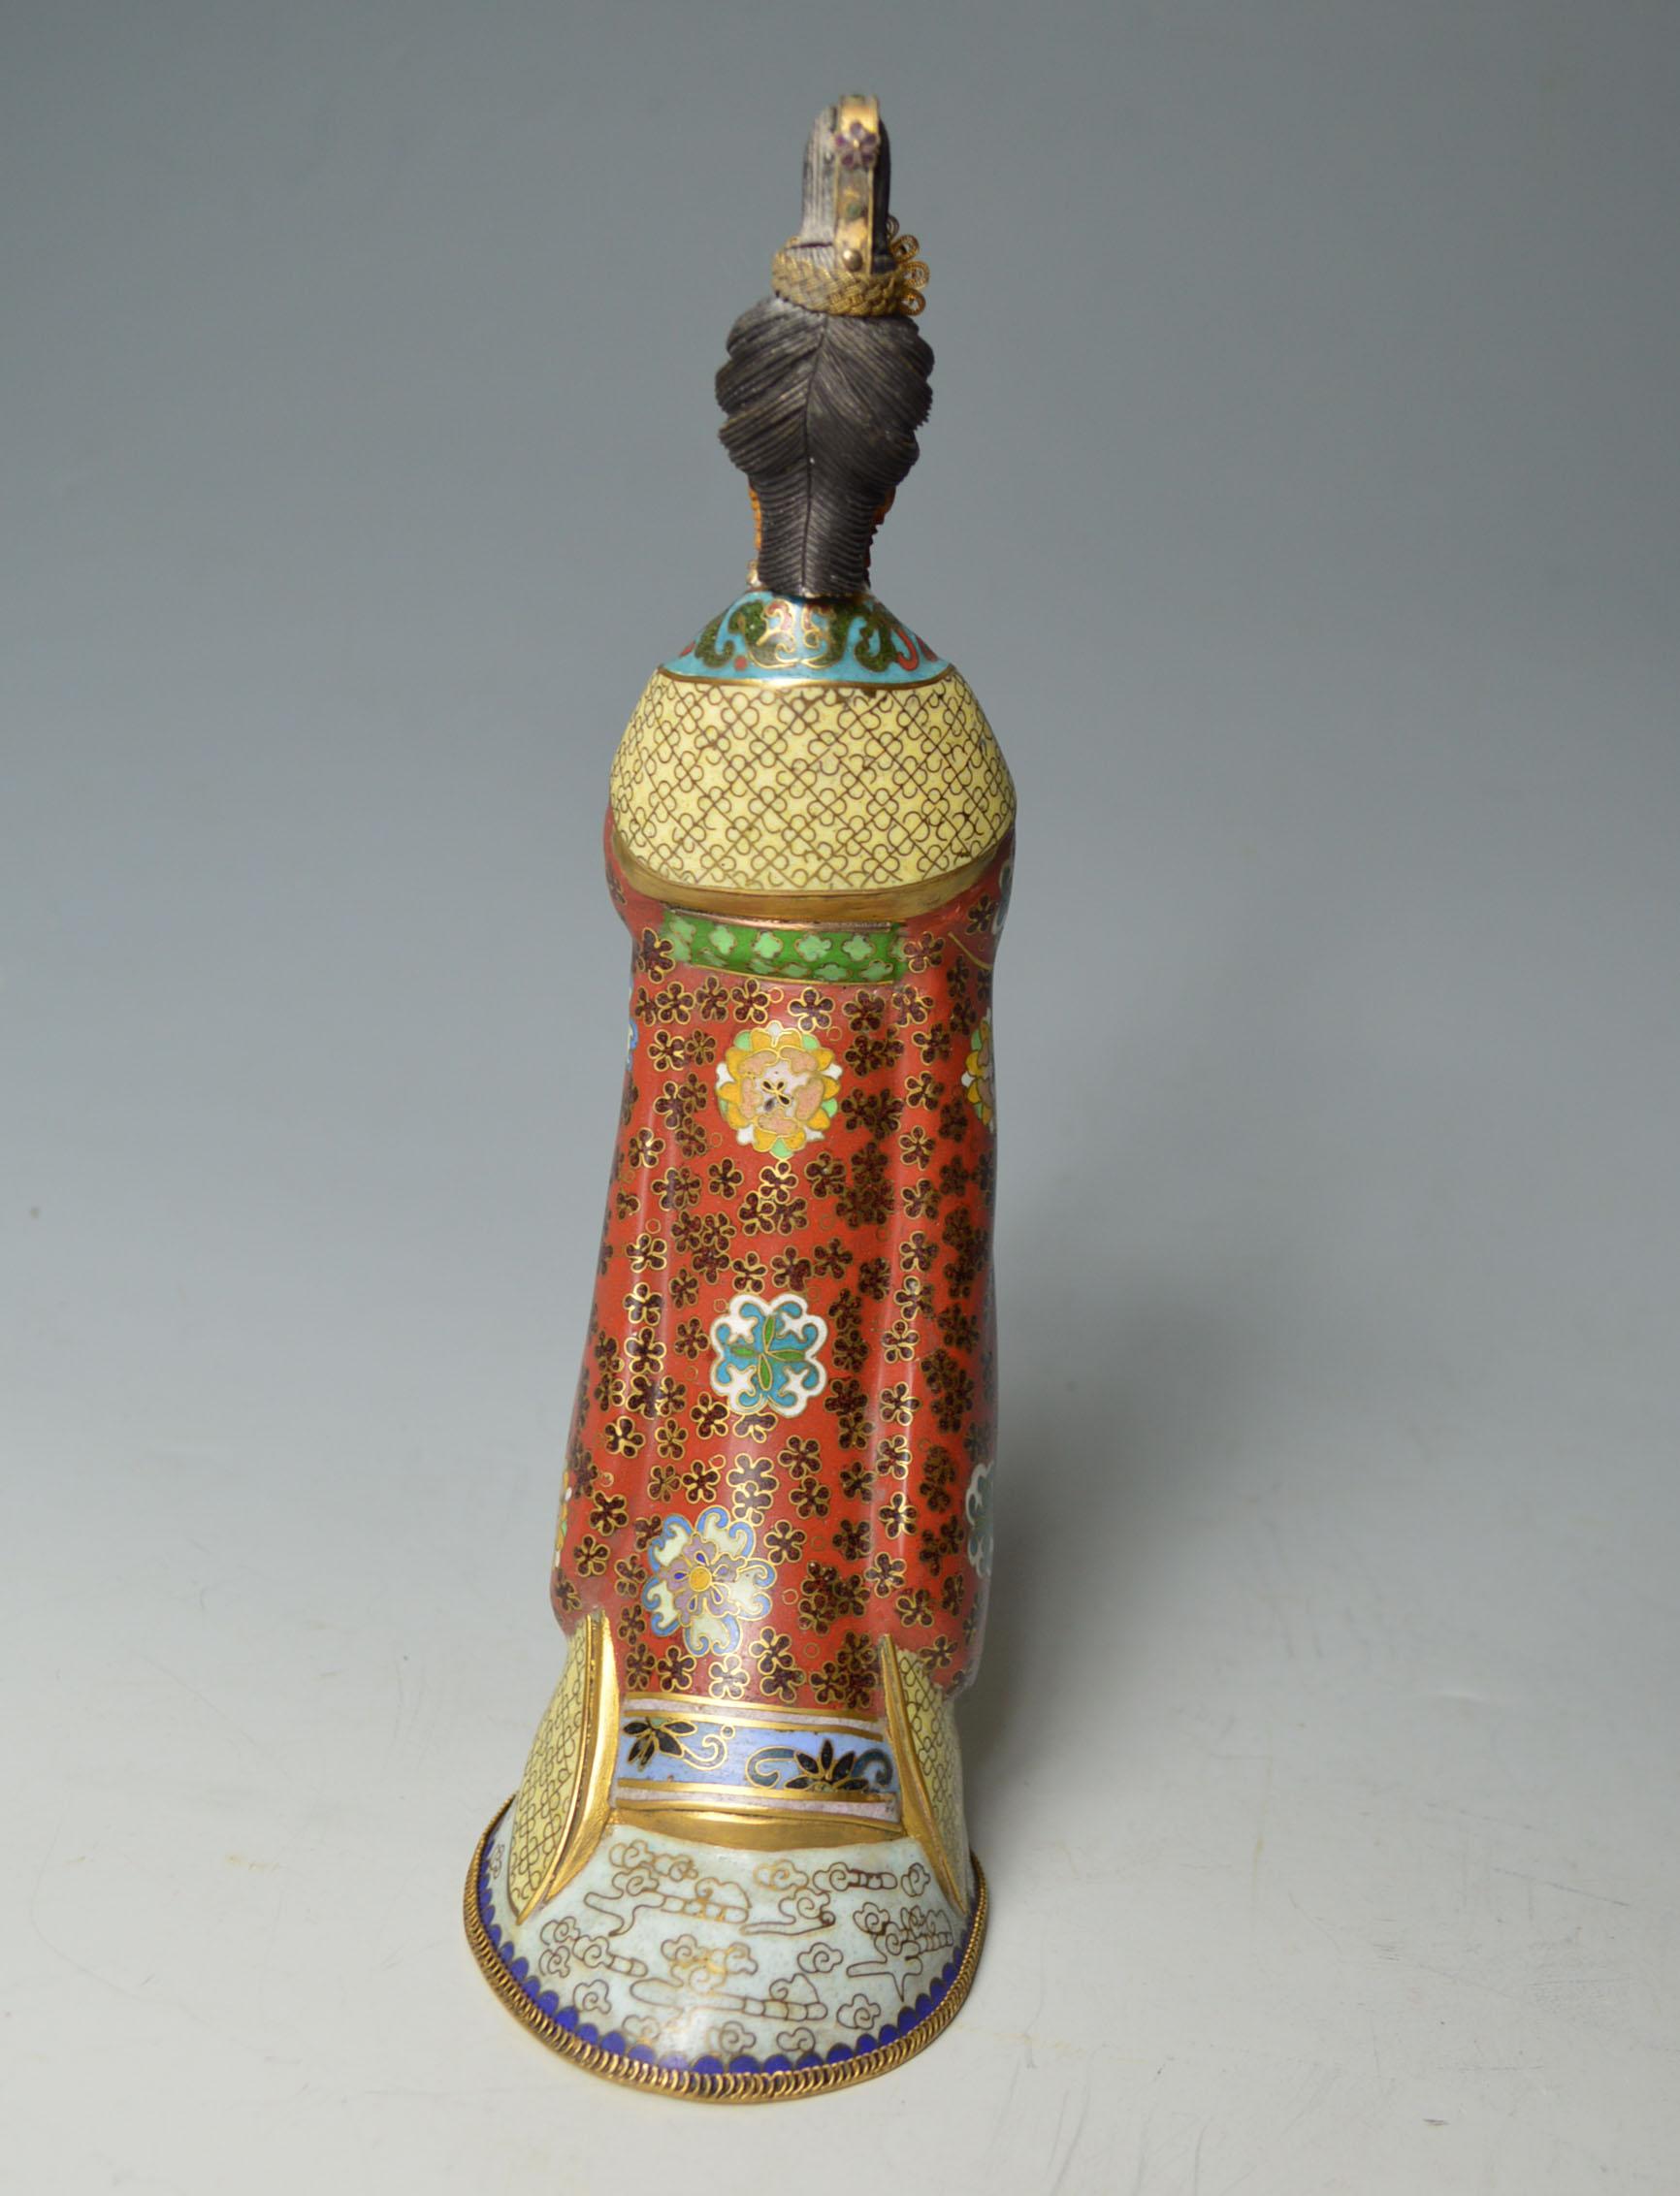 Early 20th Century Fine Chinese Cloisonne Figure of a Princess 中国古董